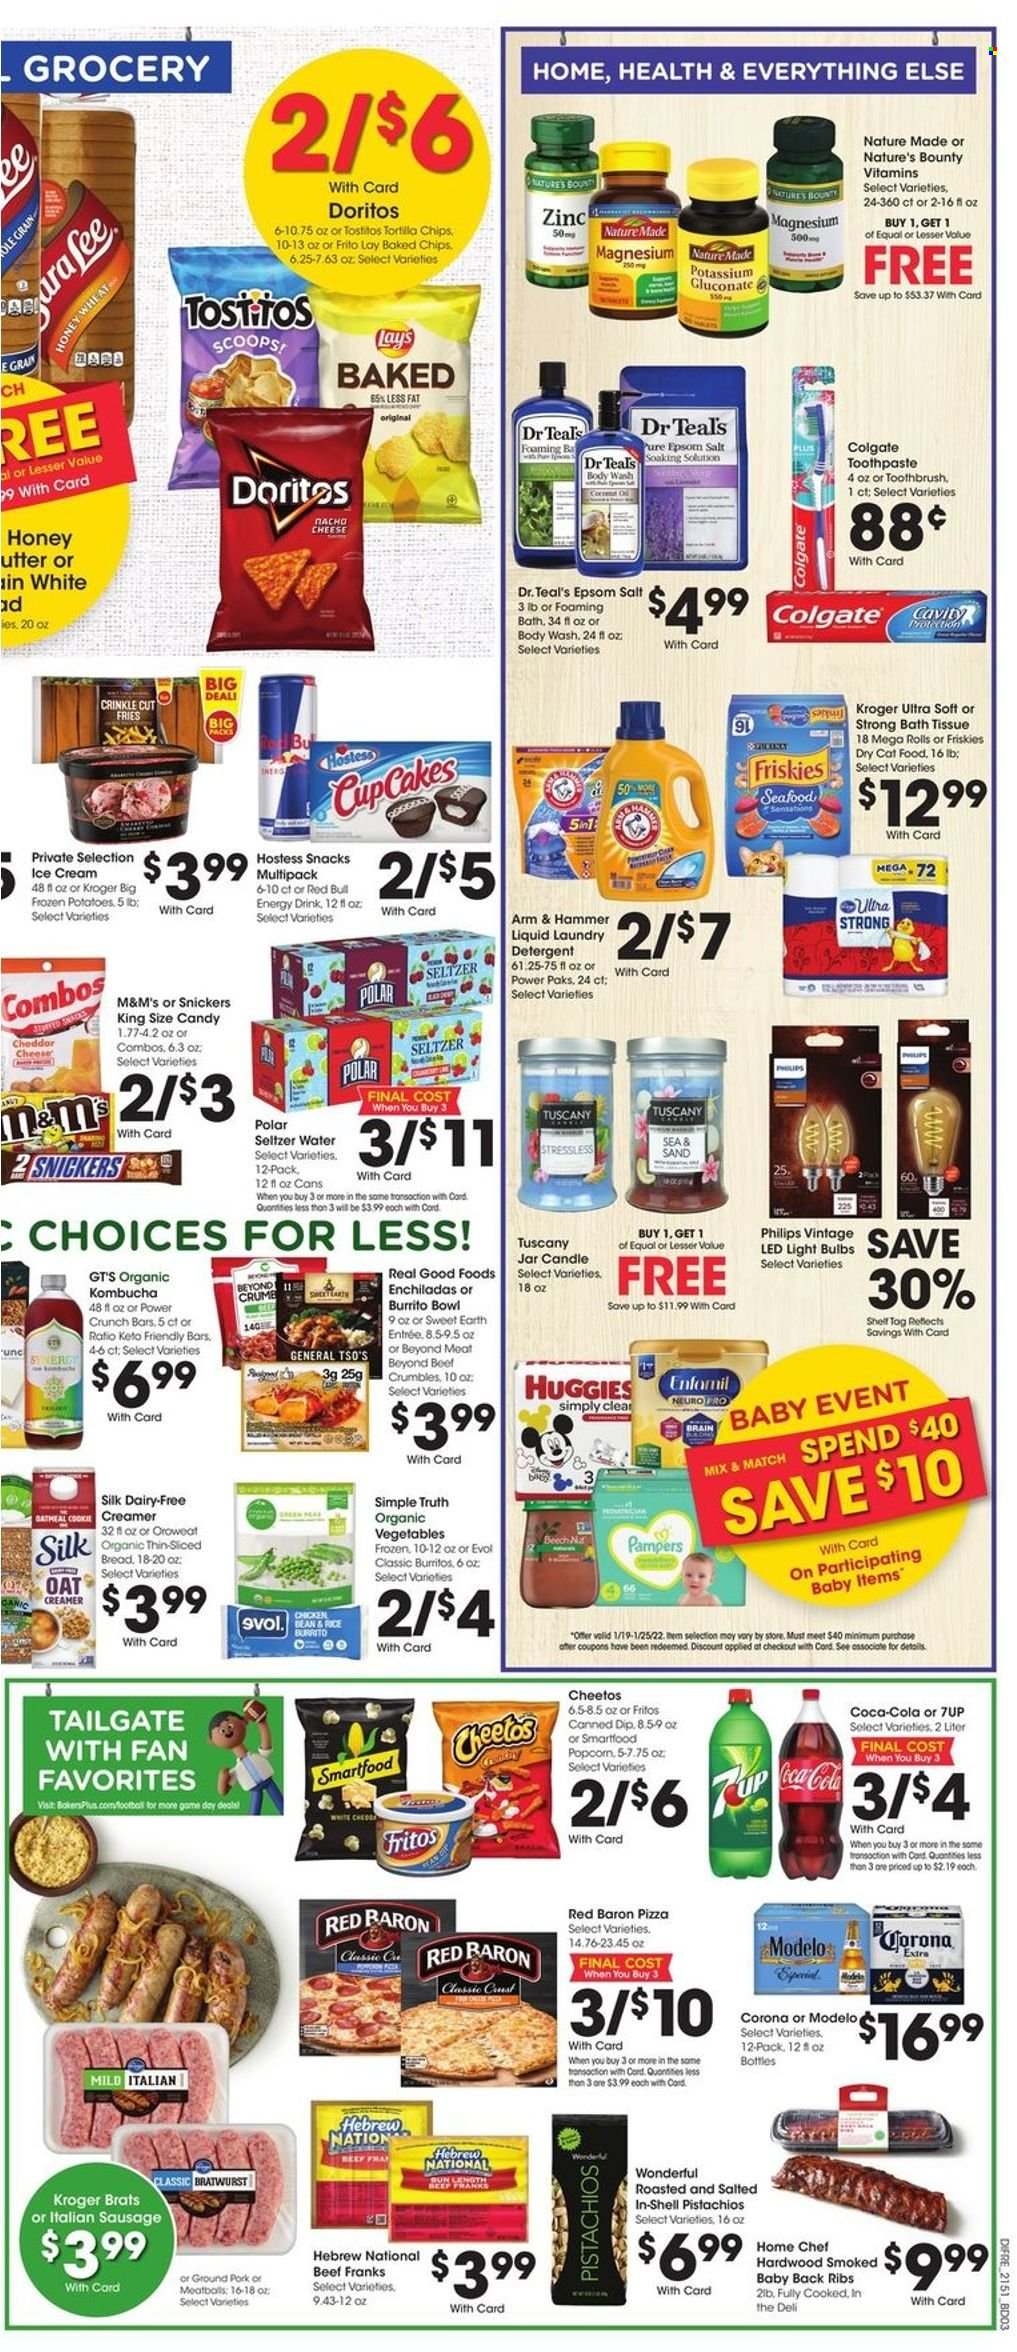 thumbnail - Baker's Flyer - 01/19/2022 - 01/25/2022 - Sales products - Philips, bread, cake, potatoes, snack, enchiladas, pizza, meatballs, burrito, bratwurst, italian sausage, frankfurters, Silk, creamer, dip, ice cream, frozen vegetables, potato fries, Red Baron, Snickers, M&M's, snack cake, Candy, sweets, Doritos, Fritos, tortilla chips, Cheetos, Lay’s, Smartfood, Tostitos, salty snack, ARM & HAMMER, Coca-Cola, energy drink, soft drink, 7UP, Red Bull, seltzer water, water, carbonated soft drink, kombucha, beer, Corona Extra, Modelo, ground pork, pork meat, pork ribs, pork back ribs, Huggies, Pampers, bath tissue, detergent, laundry detergent, body wash, Colgate, toothbrush, toothpaste, bowl, candle, bulb, light bulb, animal food, cat food, dry cat food, Friskies, magnesium, Nature Made, Nature's Bounty, zinc, dietary supplement, epsom salt, vitamins. Page 7.